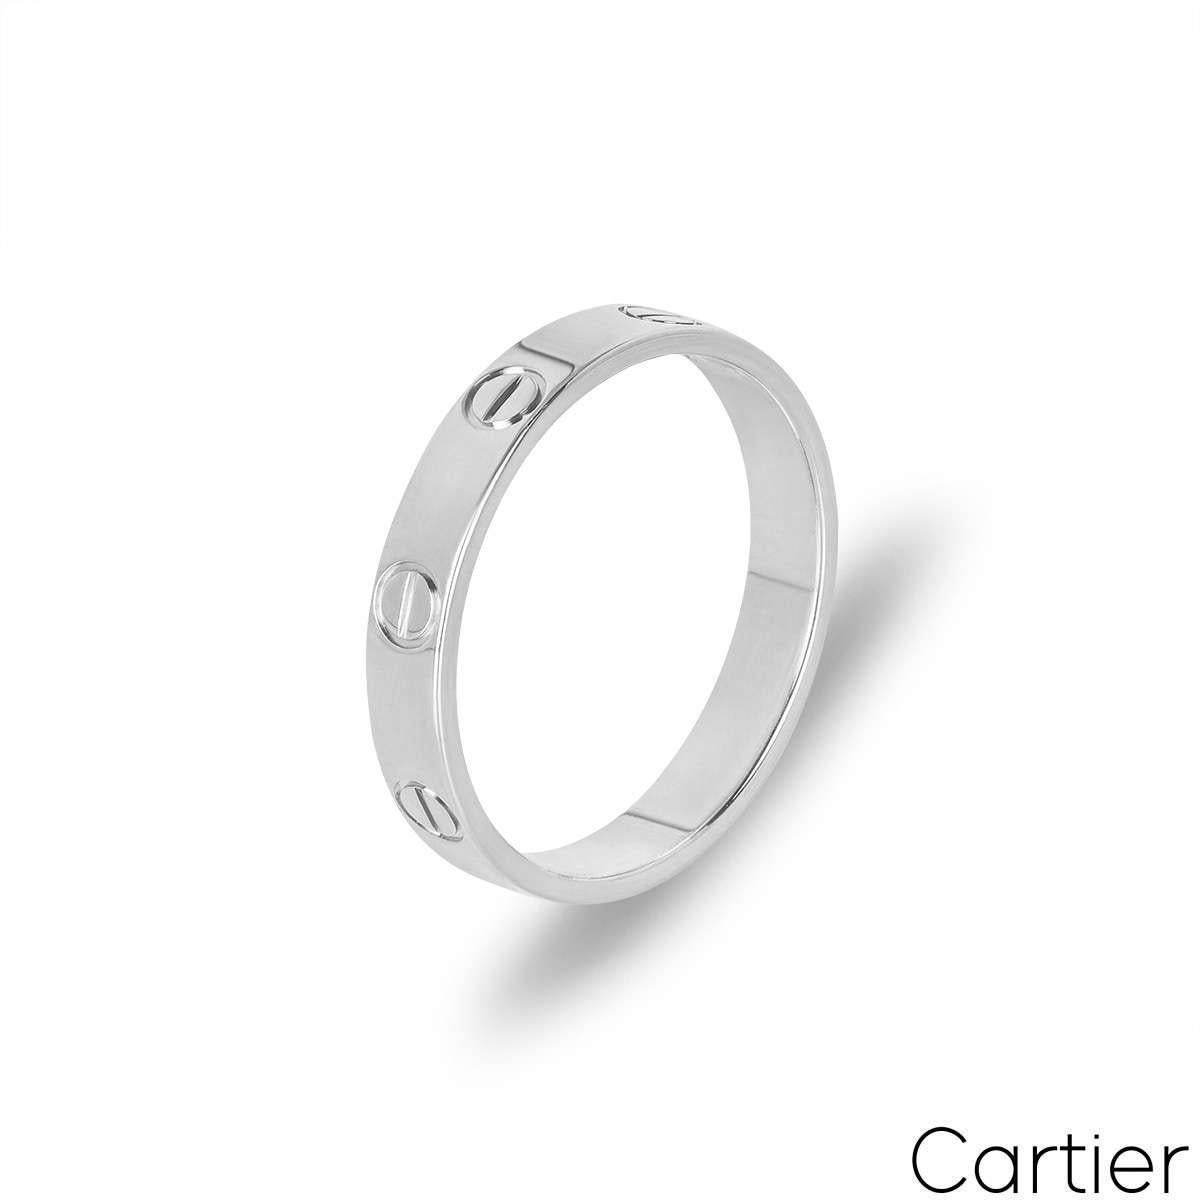 An 18k white gold Cartier wedding band from the Love collection. The ring comprises of the iconic screw motifs and is a size UK R½ - EU 59. Measuring 3.6mm in width with a gross weight of 3.29 grams.

Comes complete with a RichDiamonds presentation